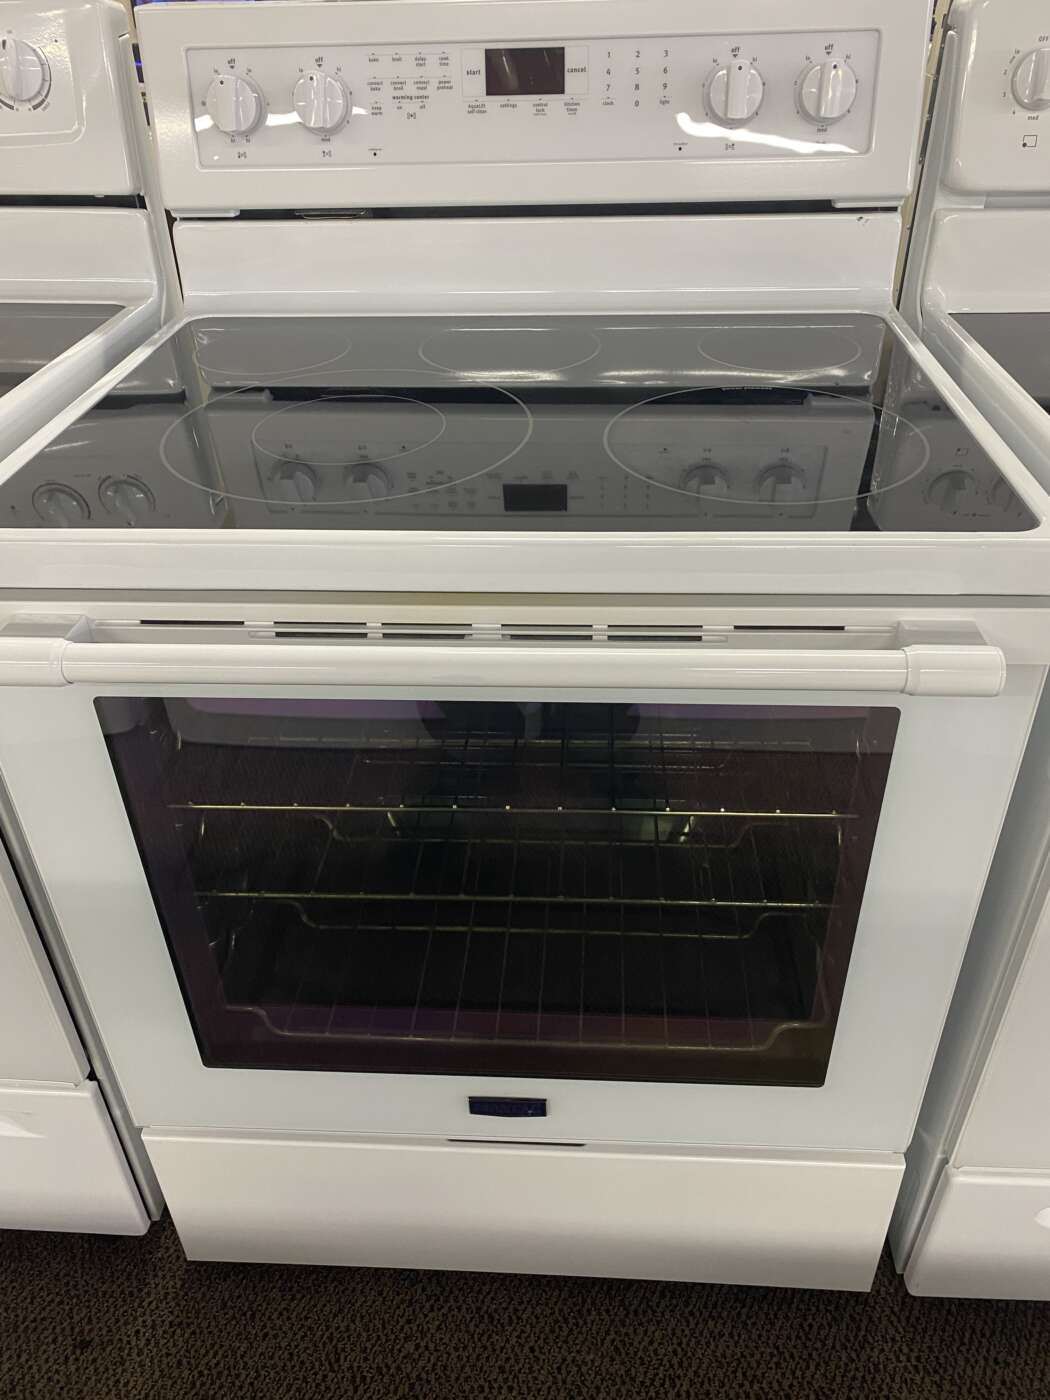 Reconditioned MAYTAG 6.4 Cu. Ft. Electric Range With True Convection